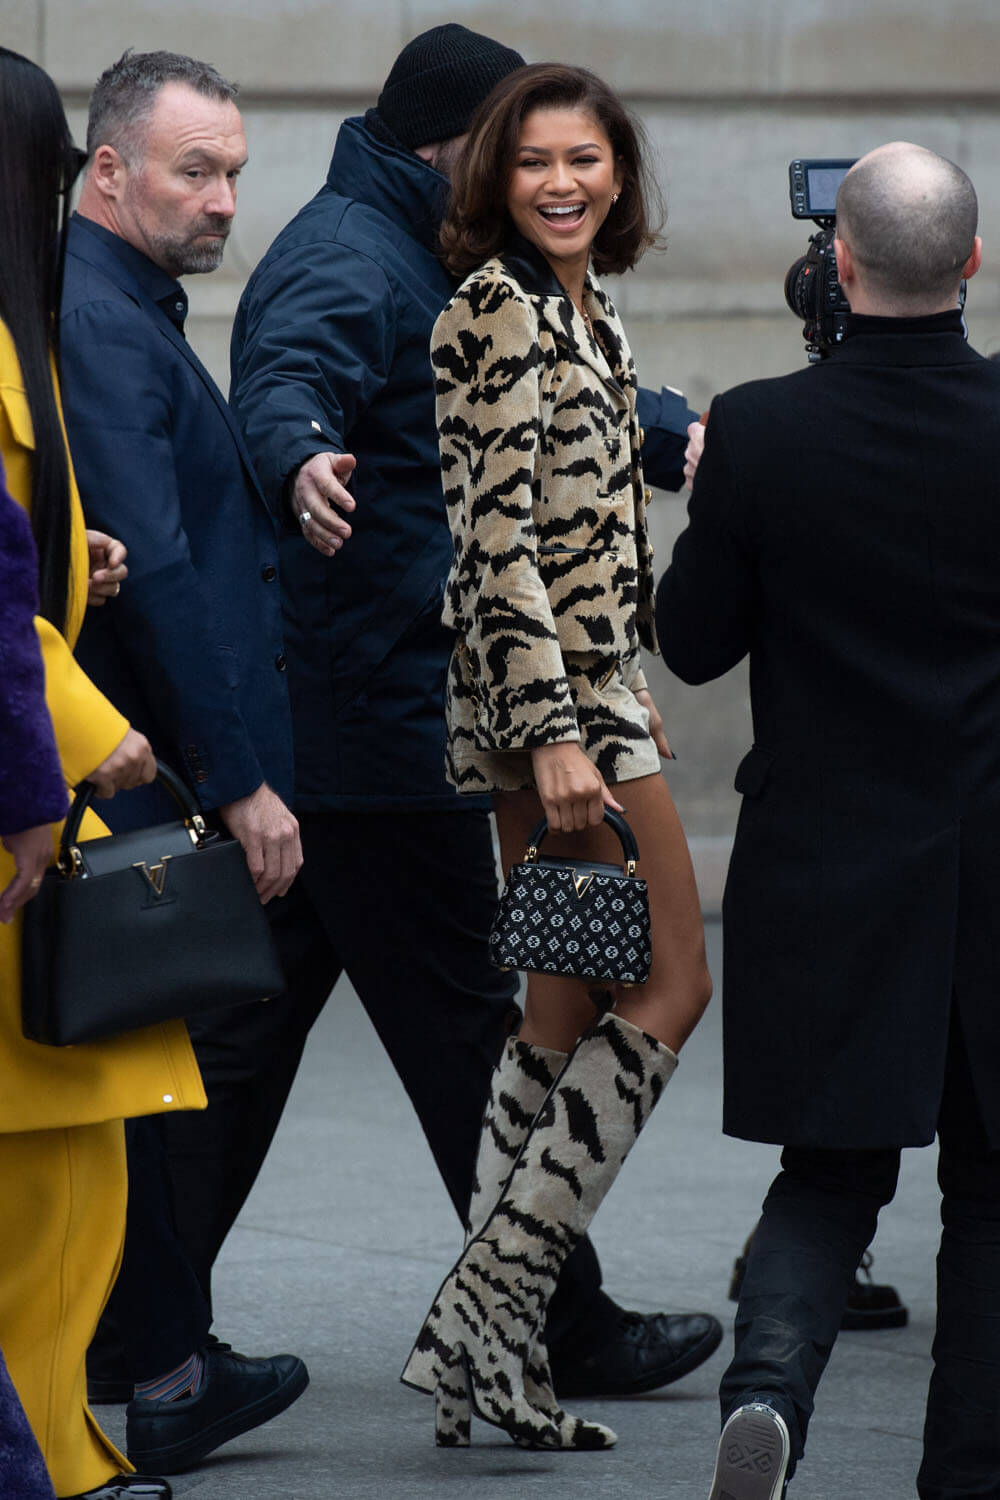 Social media is convinced that Zendaya's presence at Louis Vuitton